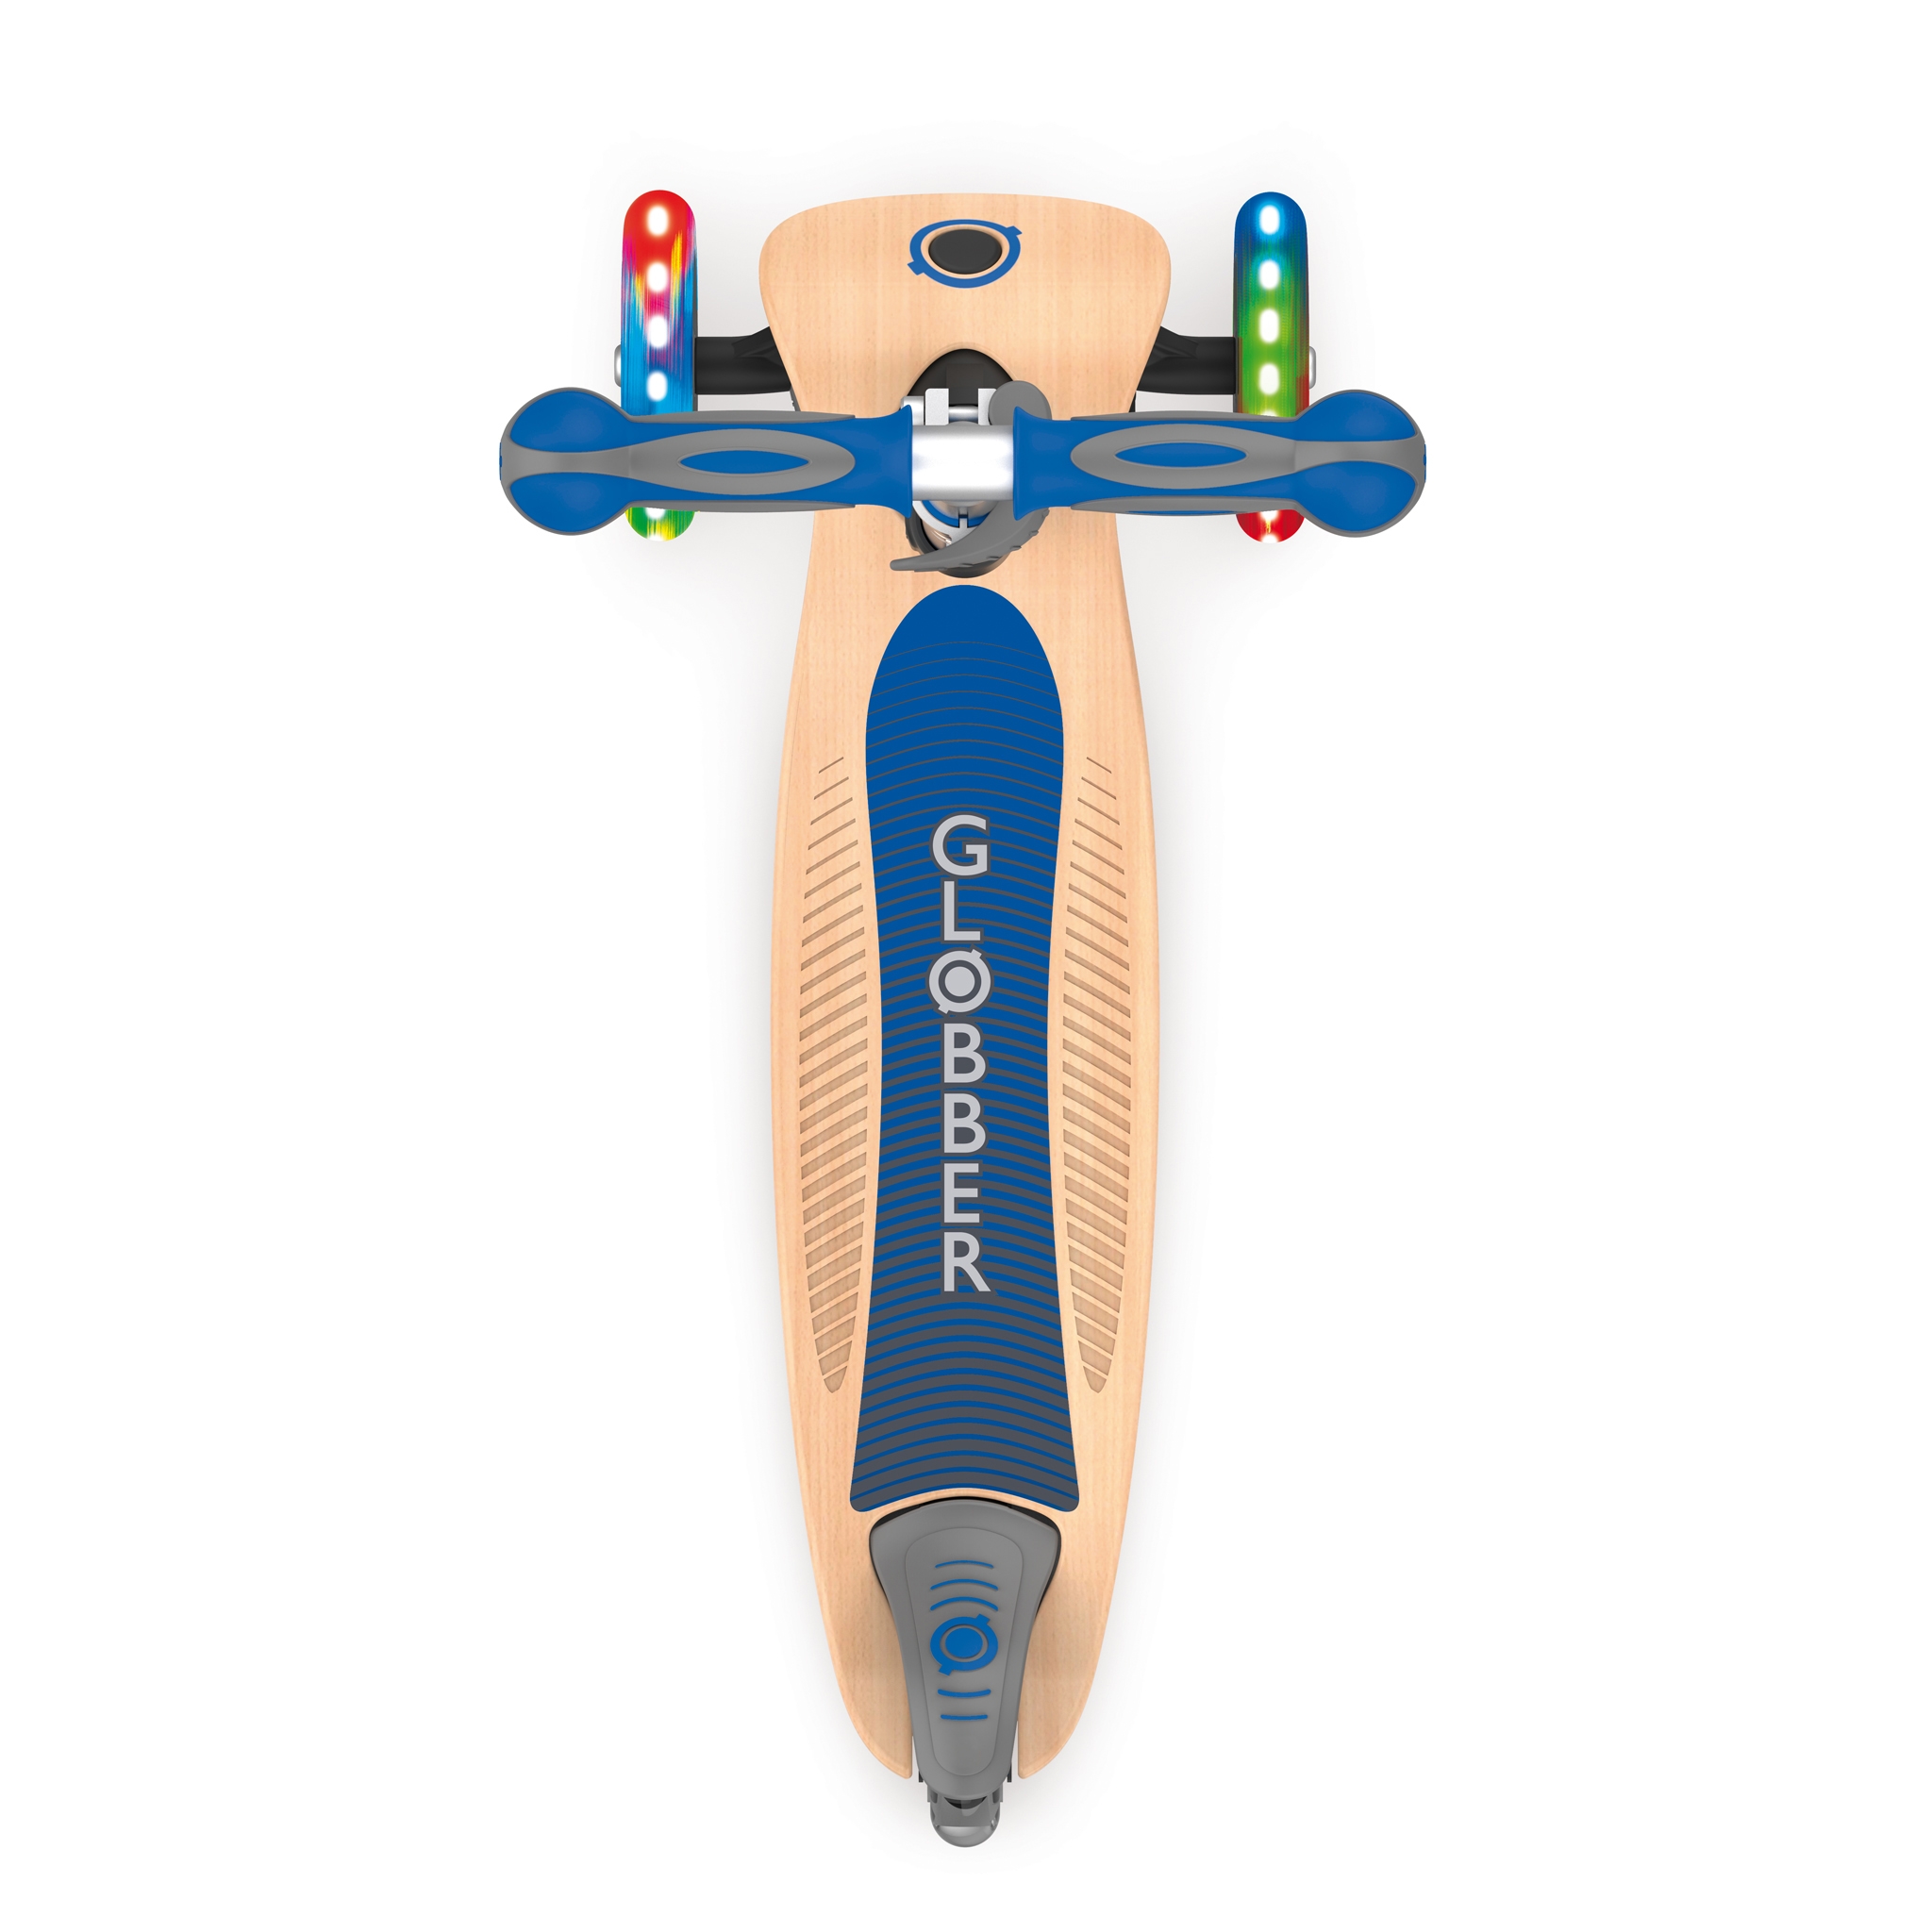 PRIMO-FOLDABLE-WOOD-LIGHTS-3-wheel-with-7-ply-wooden-scooter-deck-and-laser-engraved-sides-on-the-deck_navy-blue 2